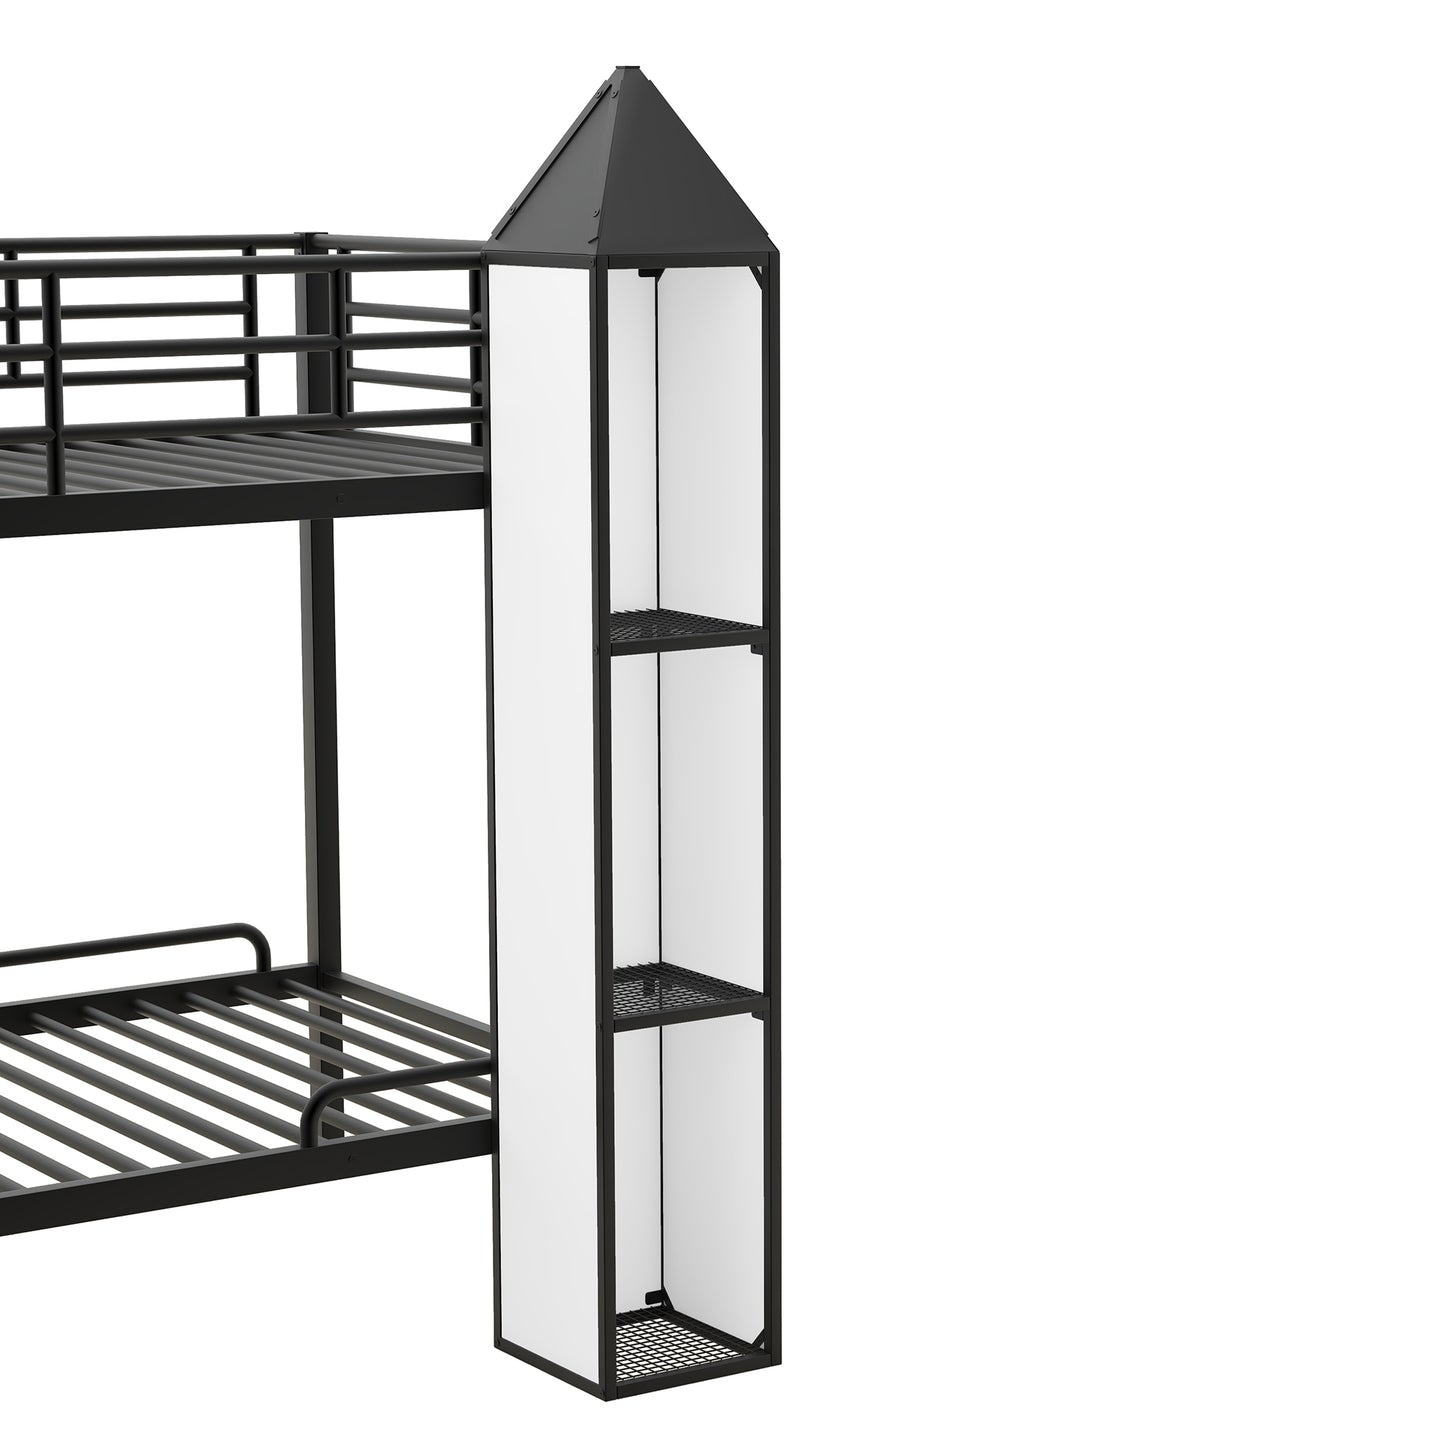 Castle Black Twin over Twin Bunk Bed